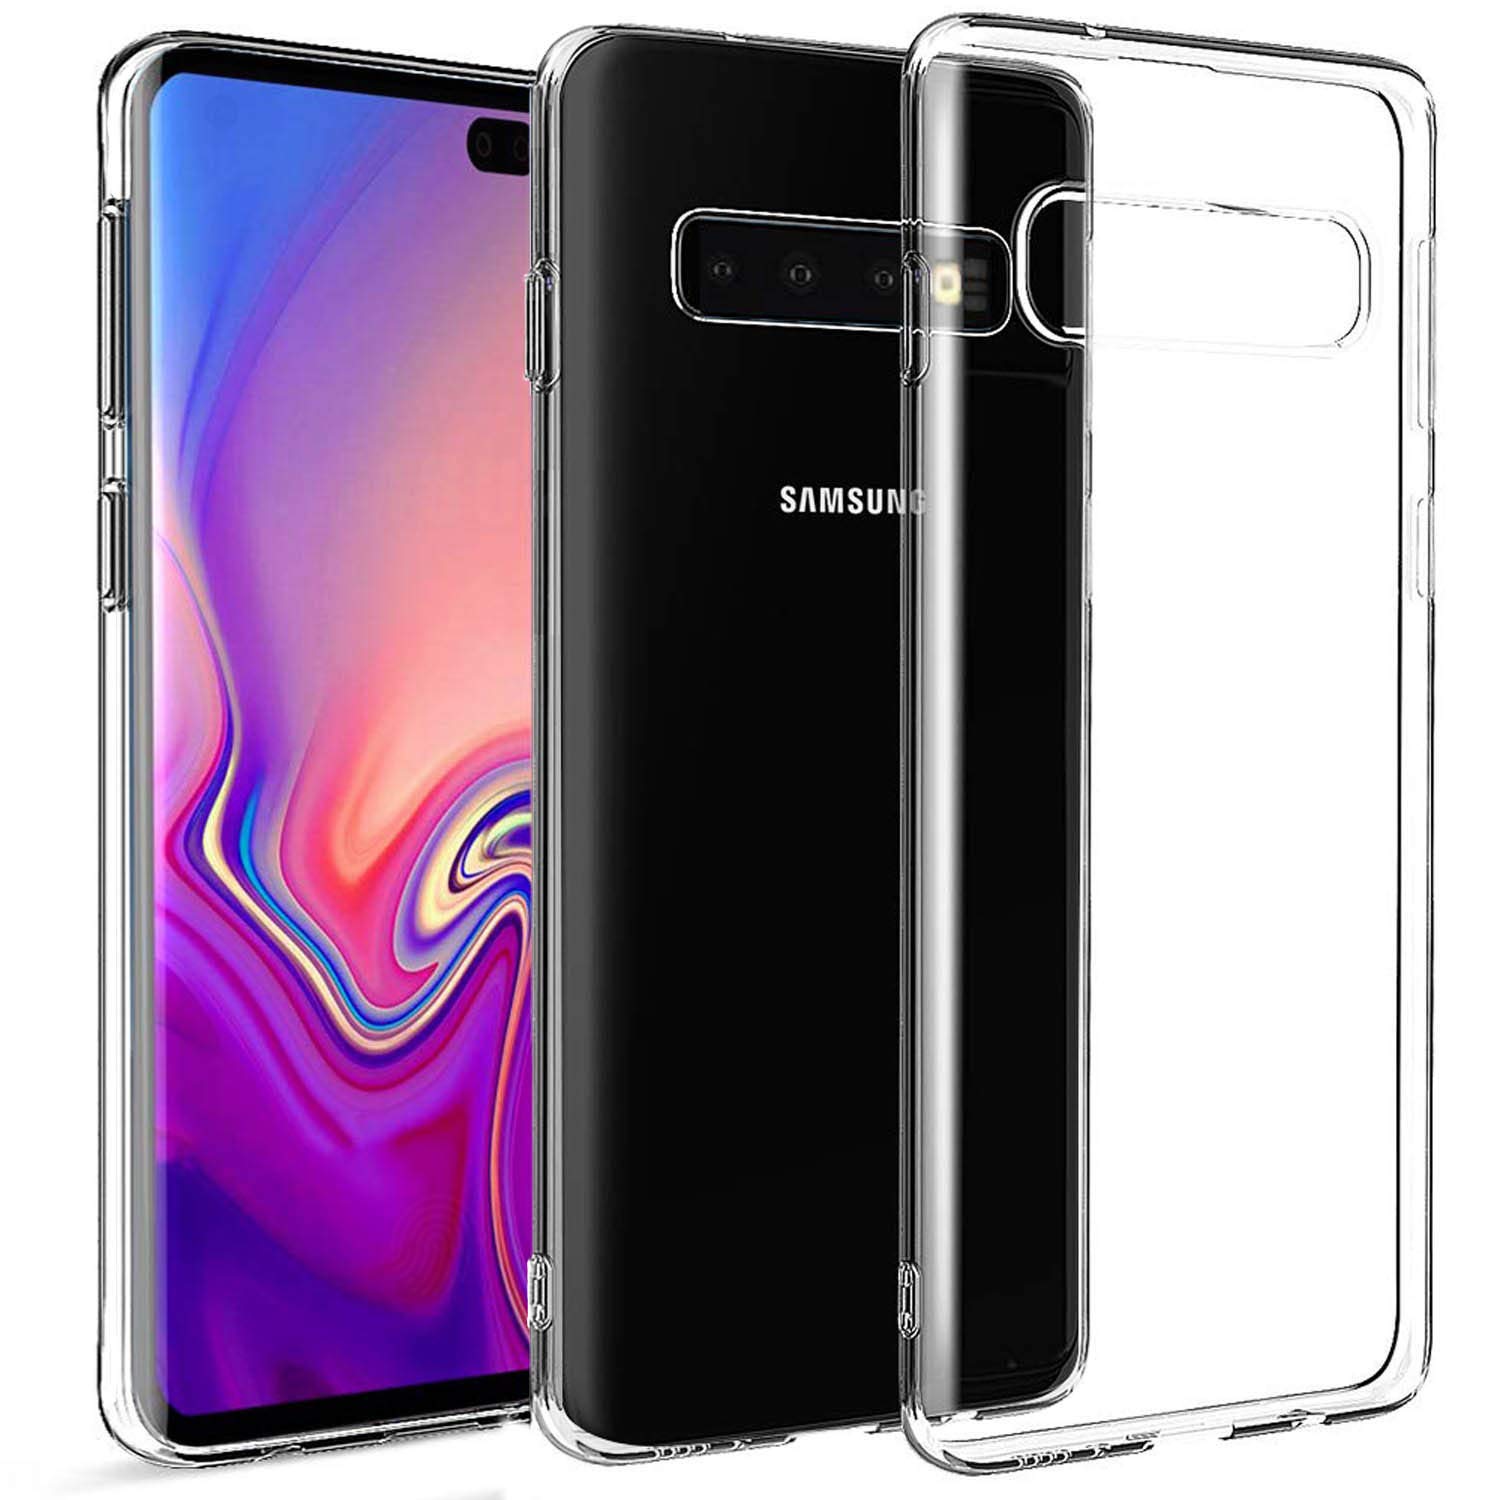 Crystal Clear slim protective case for Samsung Samsung Galaxy S10e cell phones